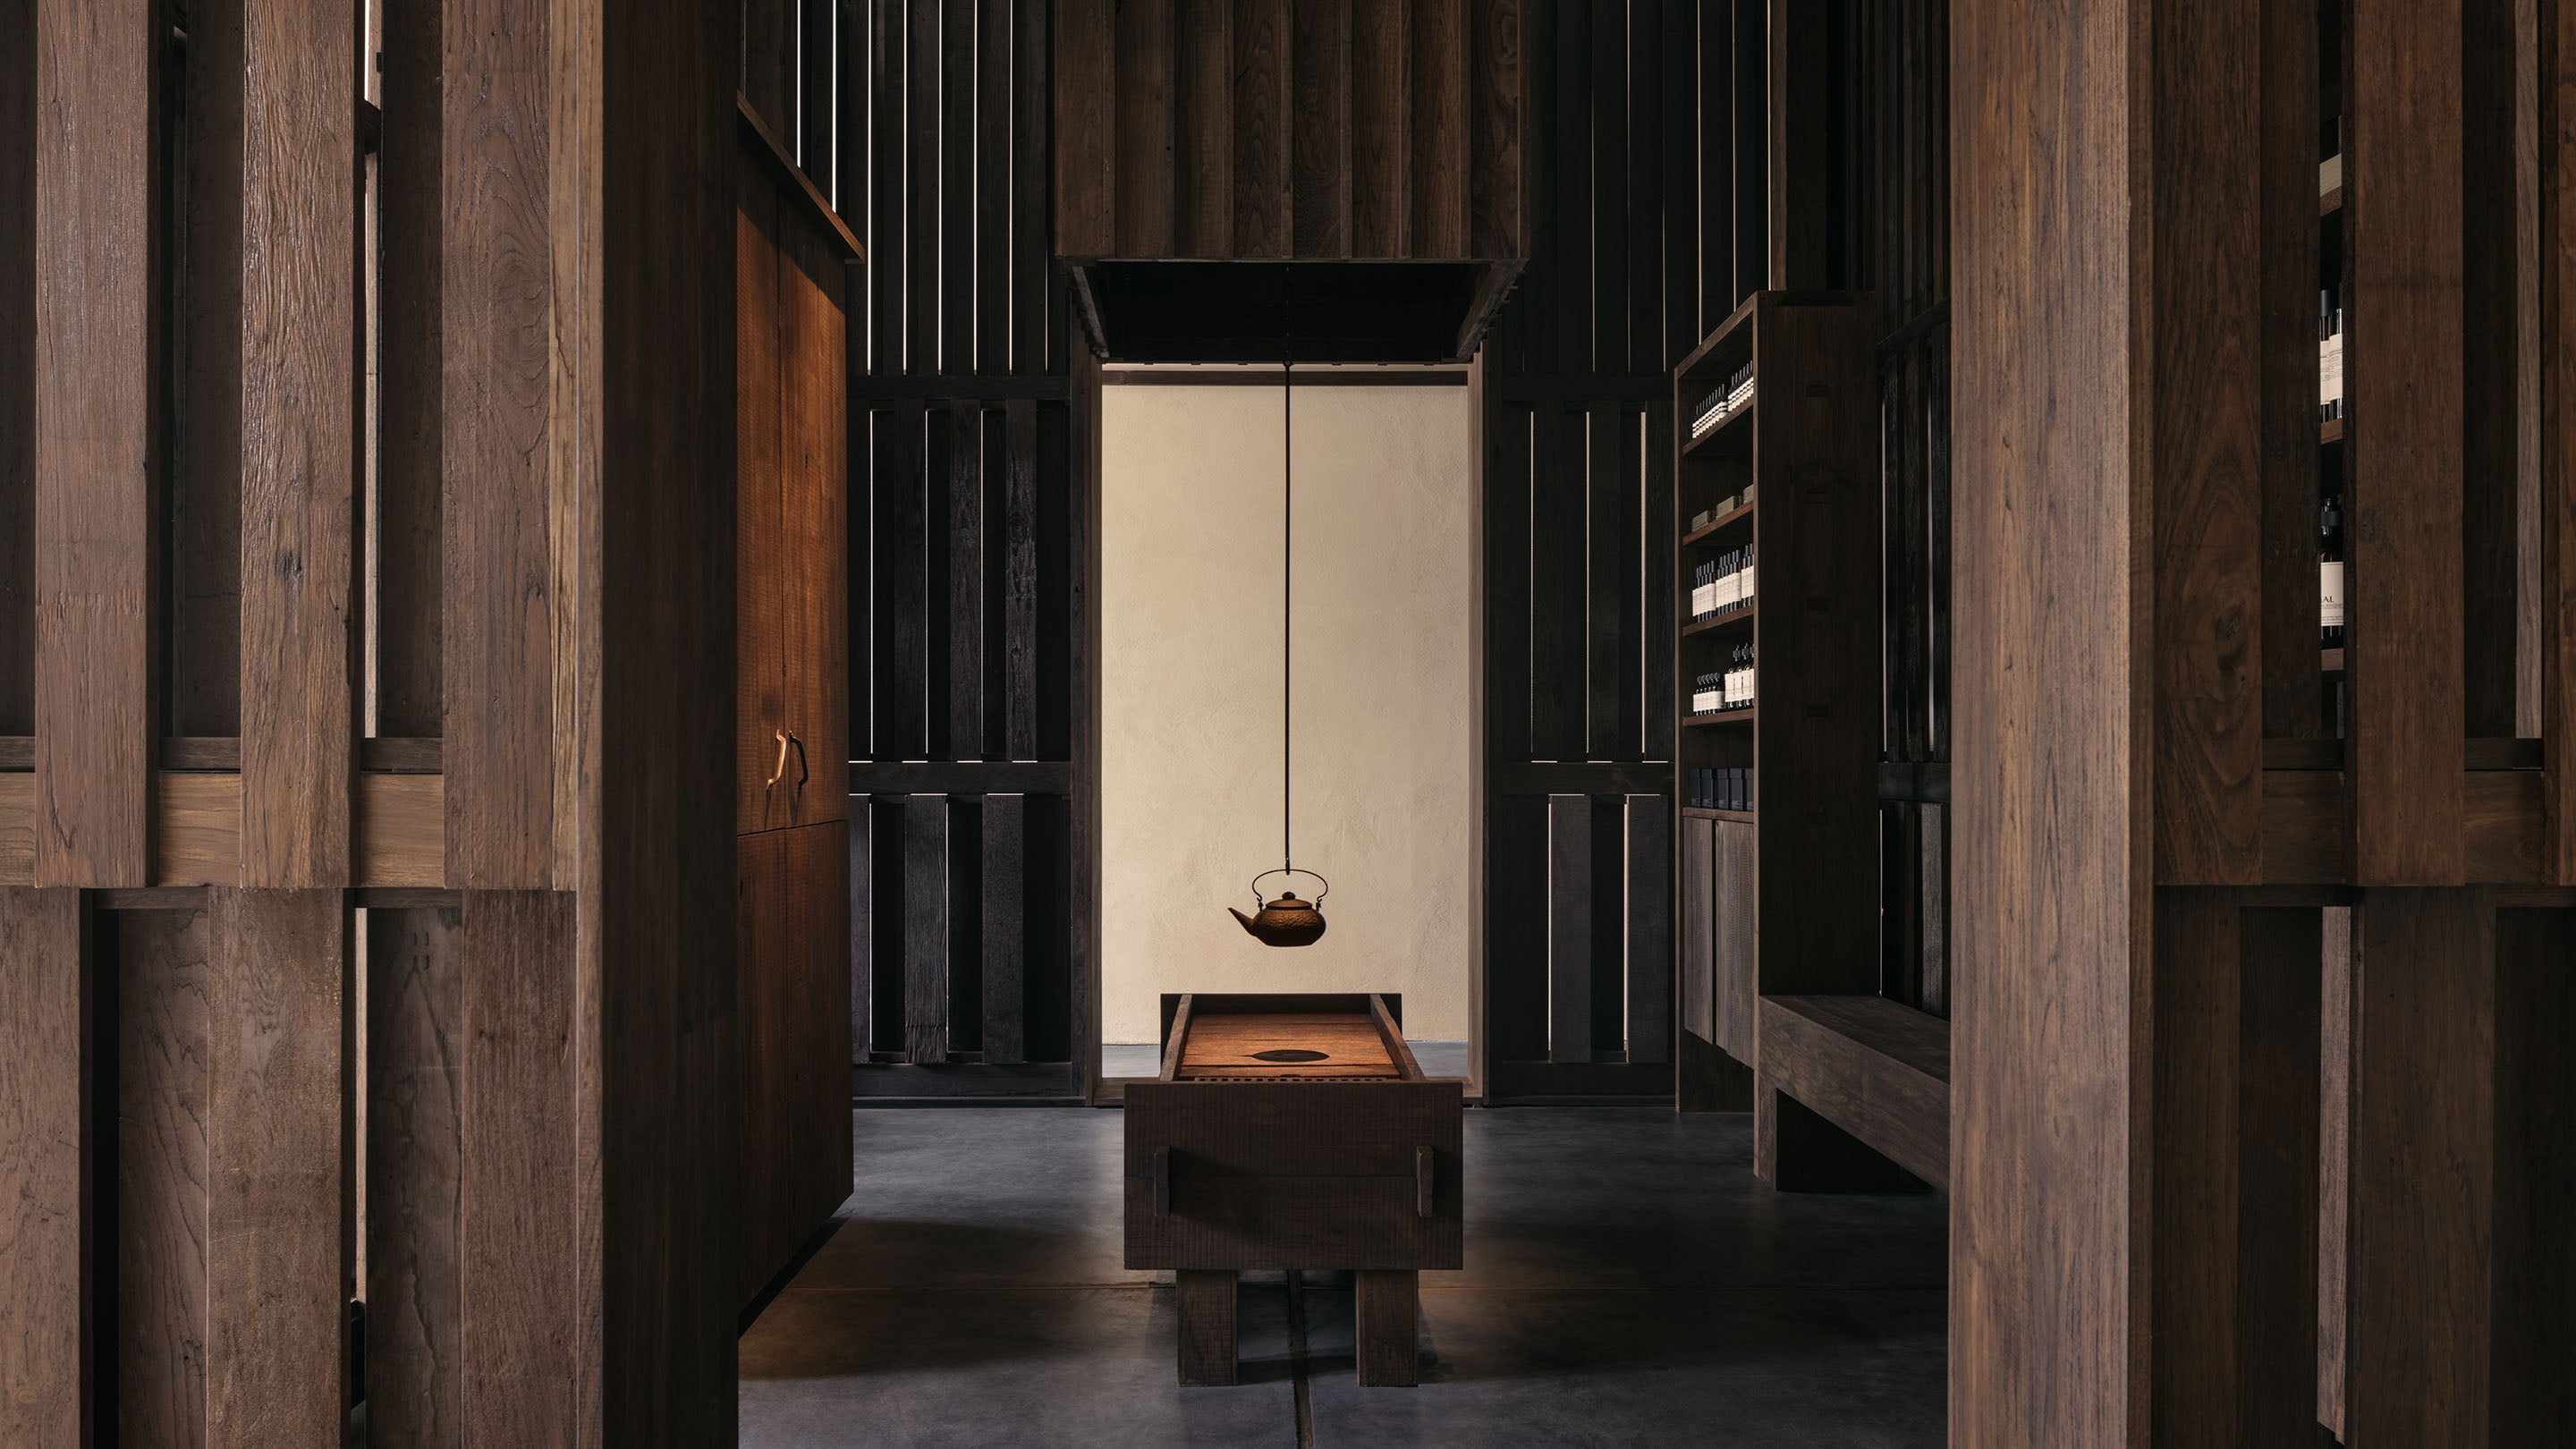 The Aesop Thonglor store interior with reclaimed teak wall panelling and a suspended steel teapot.